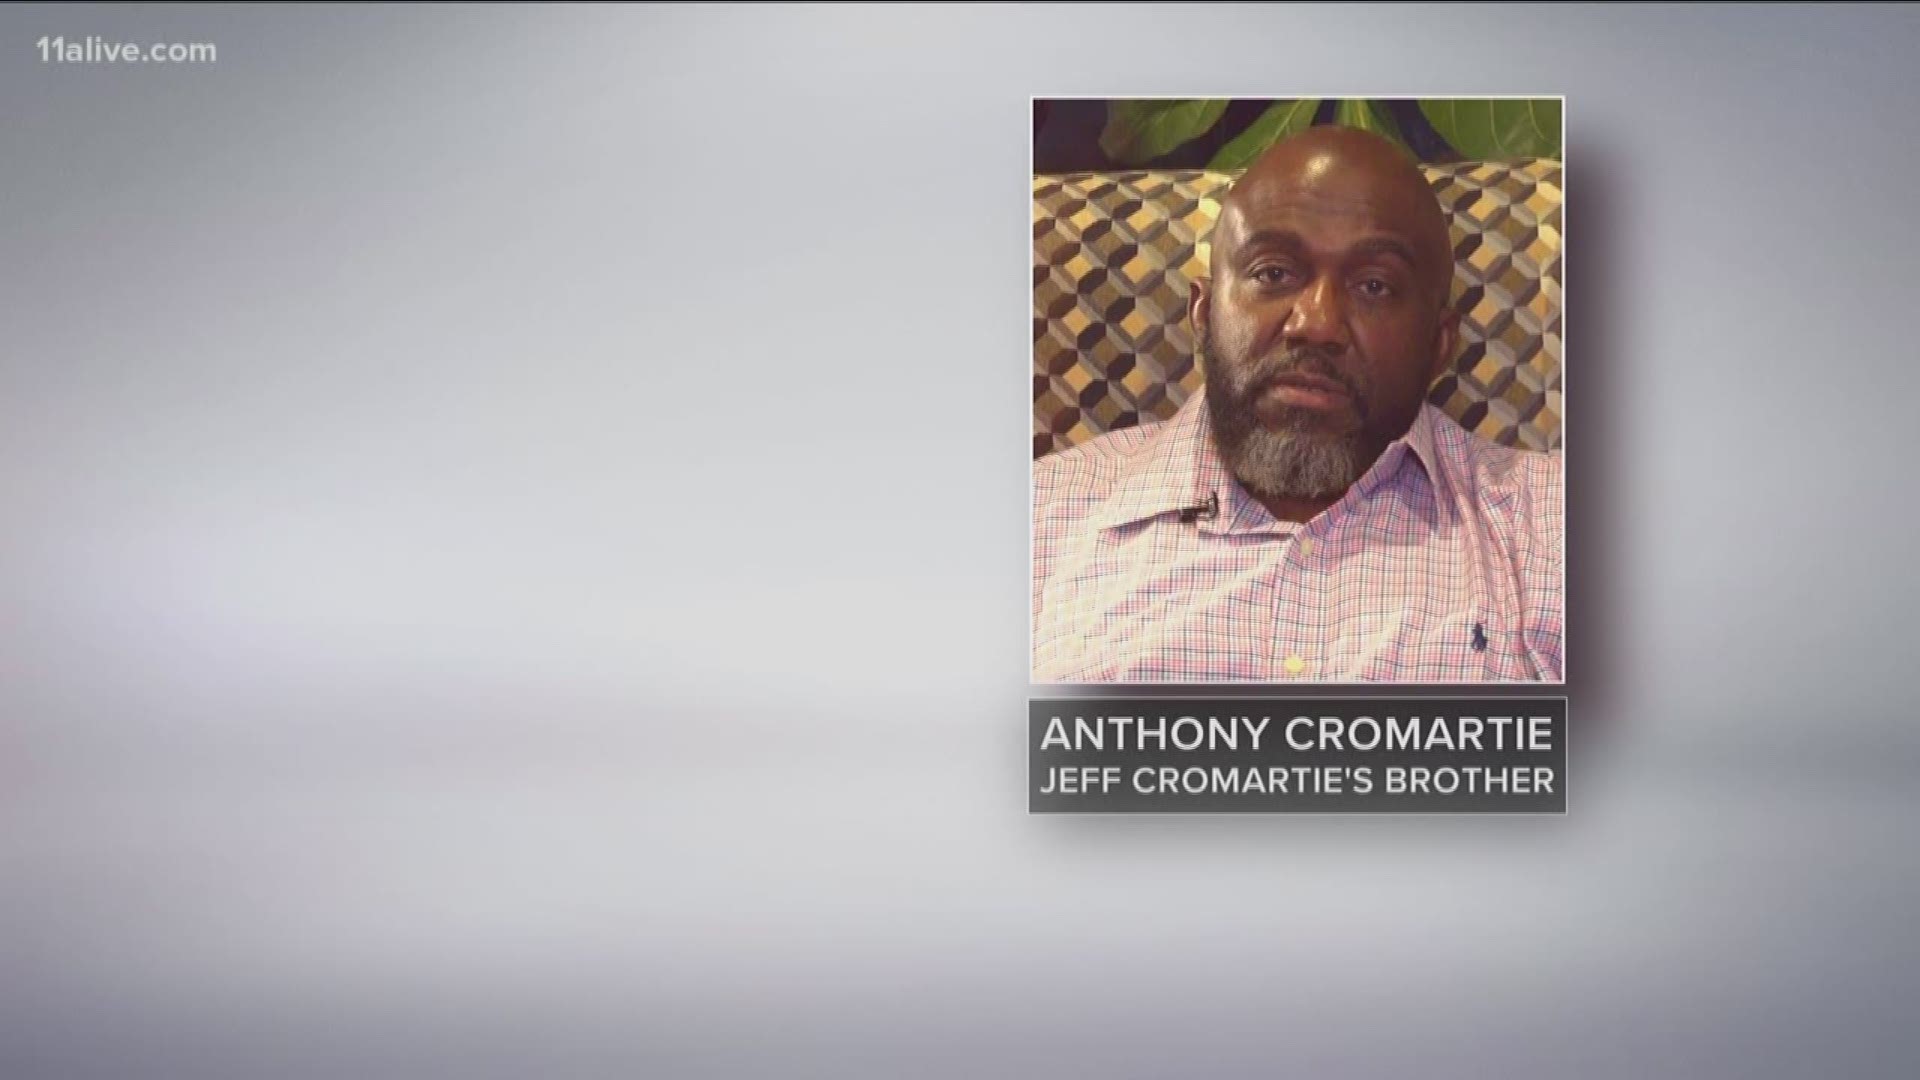 Anthony Cromartie is filing a wrongful death lawsuit against Georgia after his brother, Ray "Jeff" Cromartie was executed for the 1994 murder of Richard Slysz.